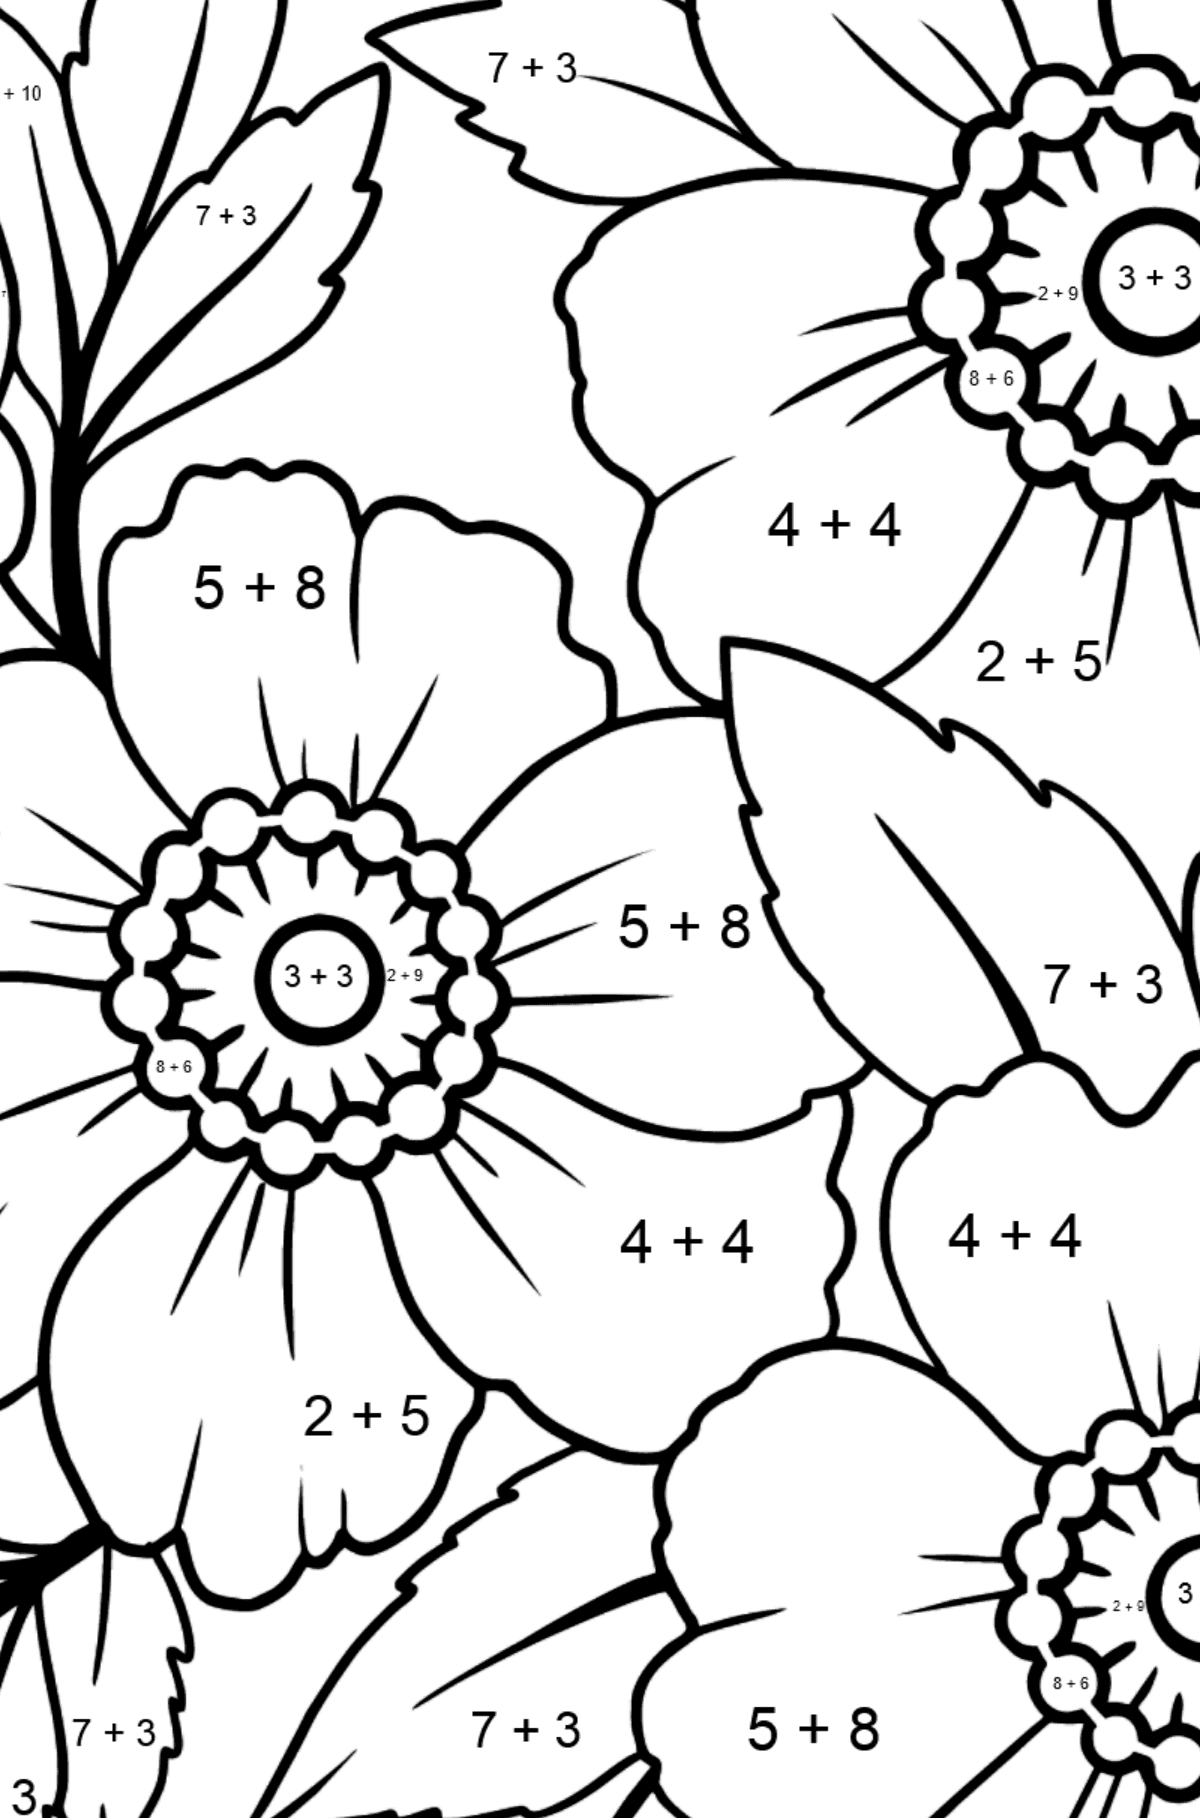 Flower Coloring Page (A4) - A Japanese Anemone with Pink Petals - Math Coloring - Addition for Kids